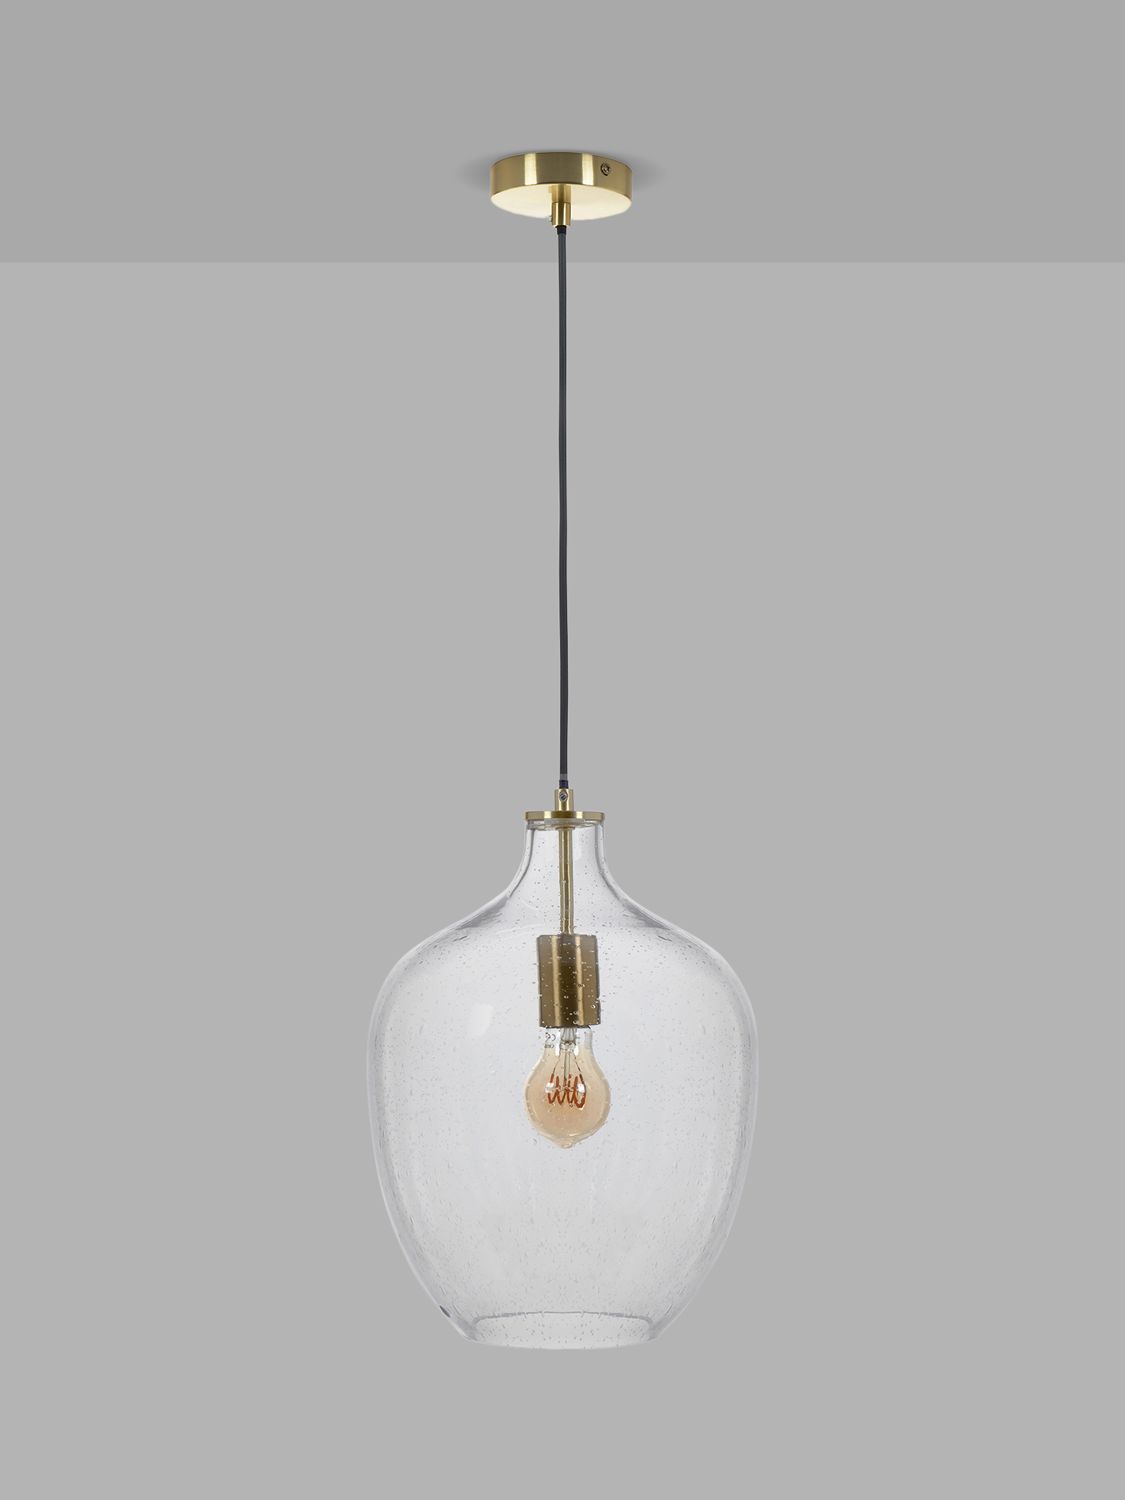 Photo of Pacific lifestyle islay bubble pendant ceiling light clear